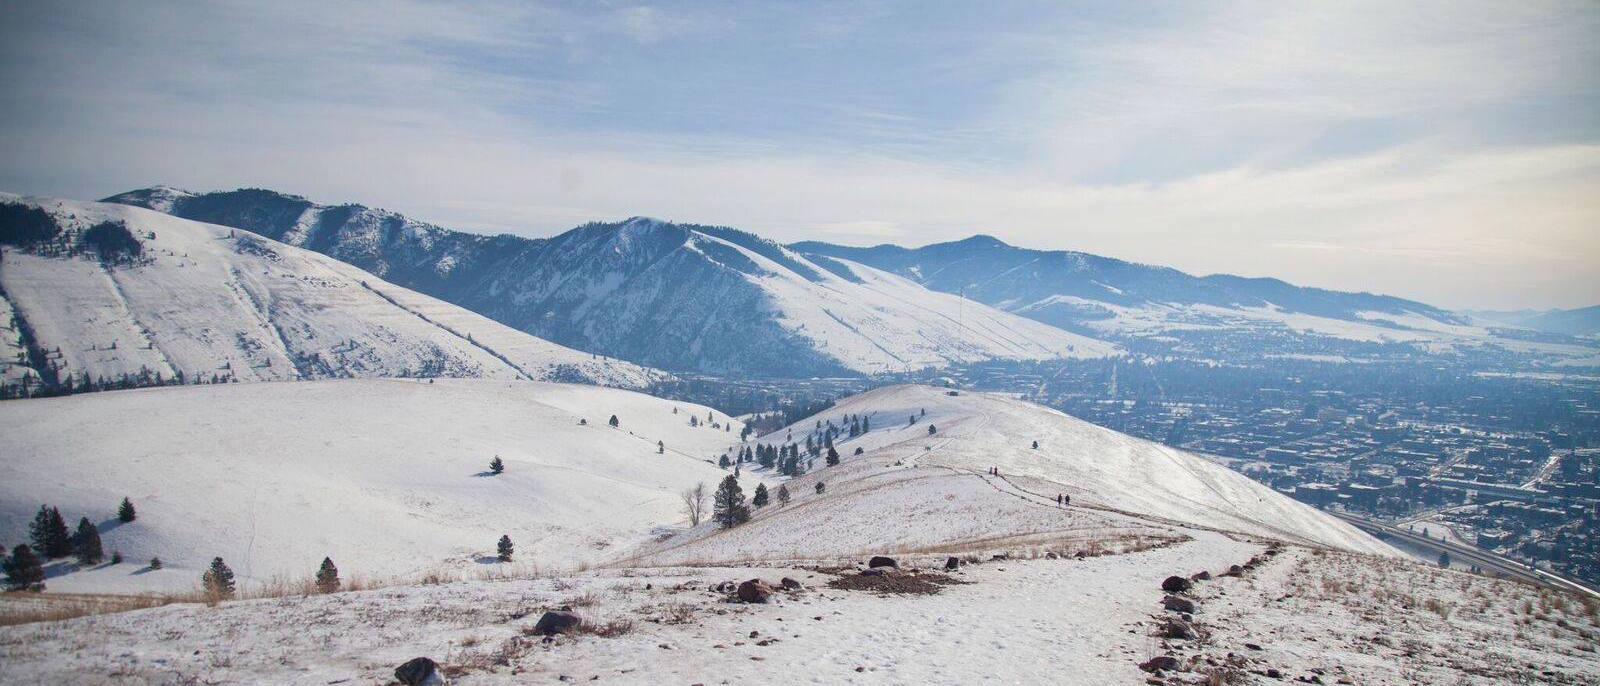 24 Coolest Towns in the USA - Missoula, MT